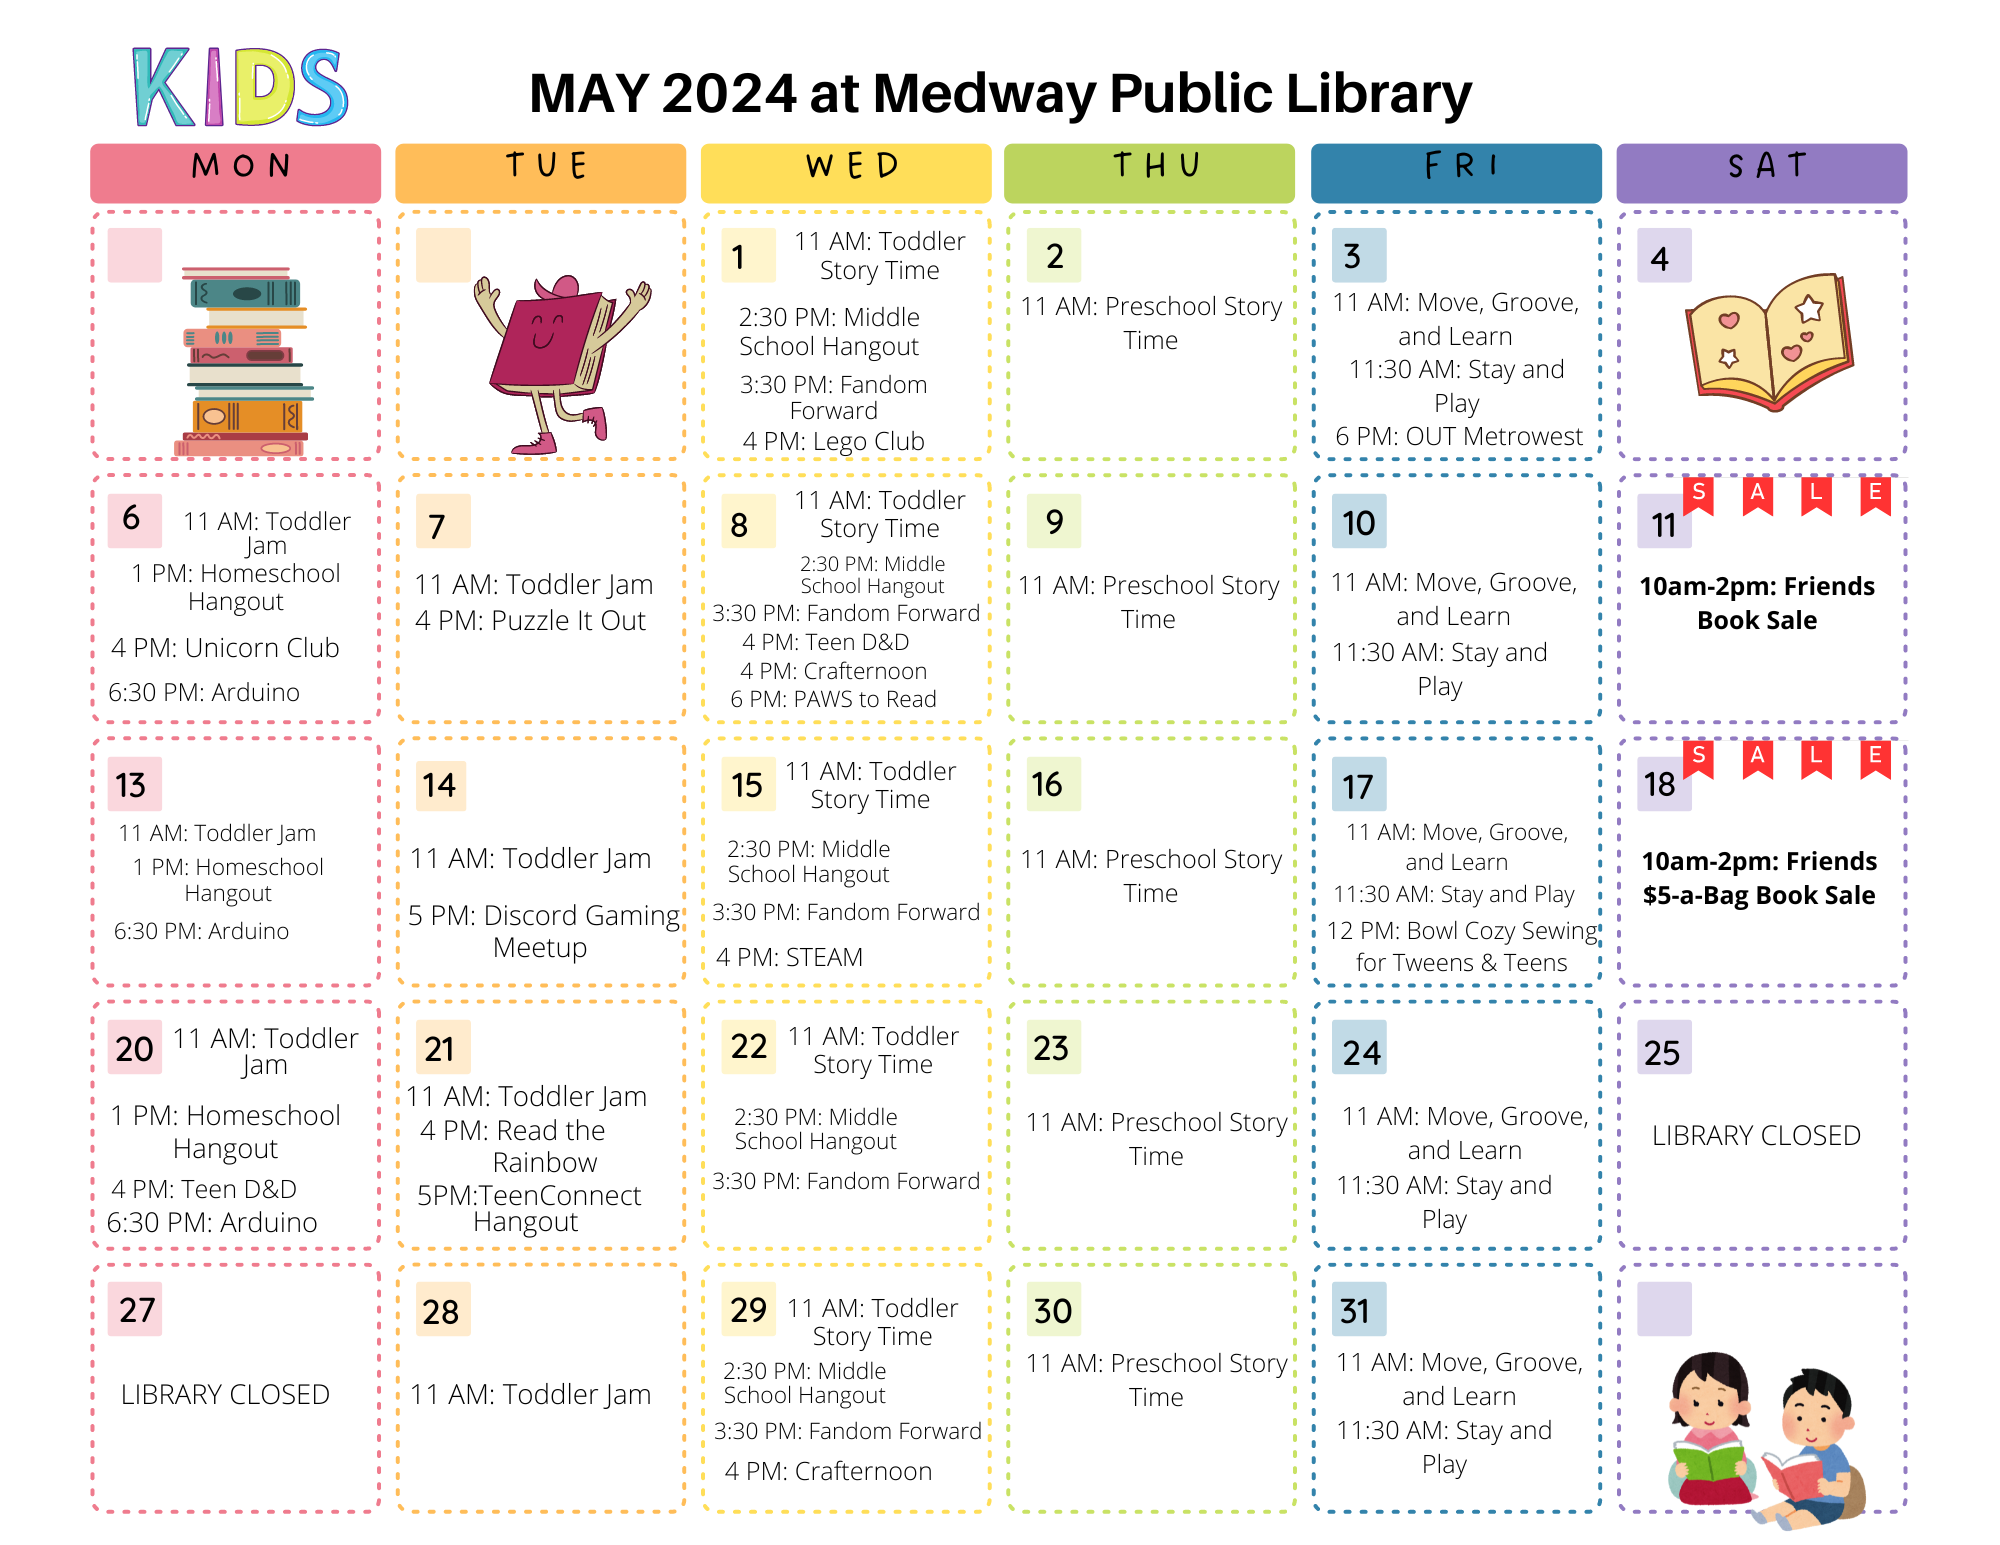 MAY 2024 KIDS events